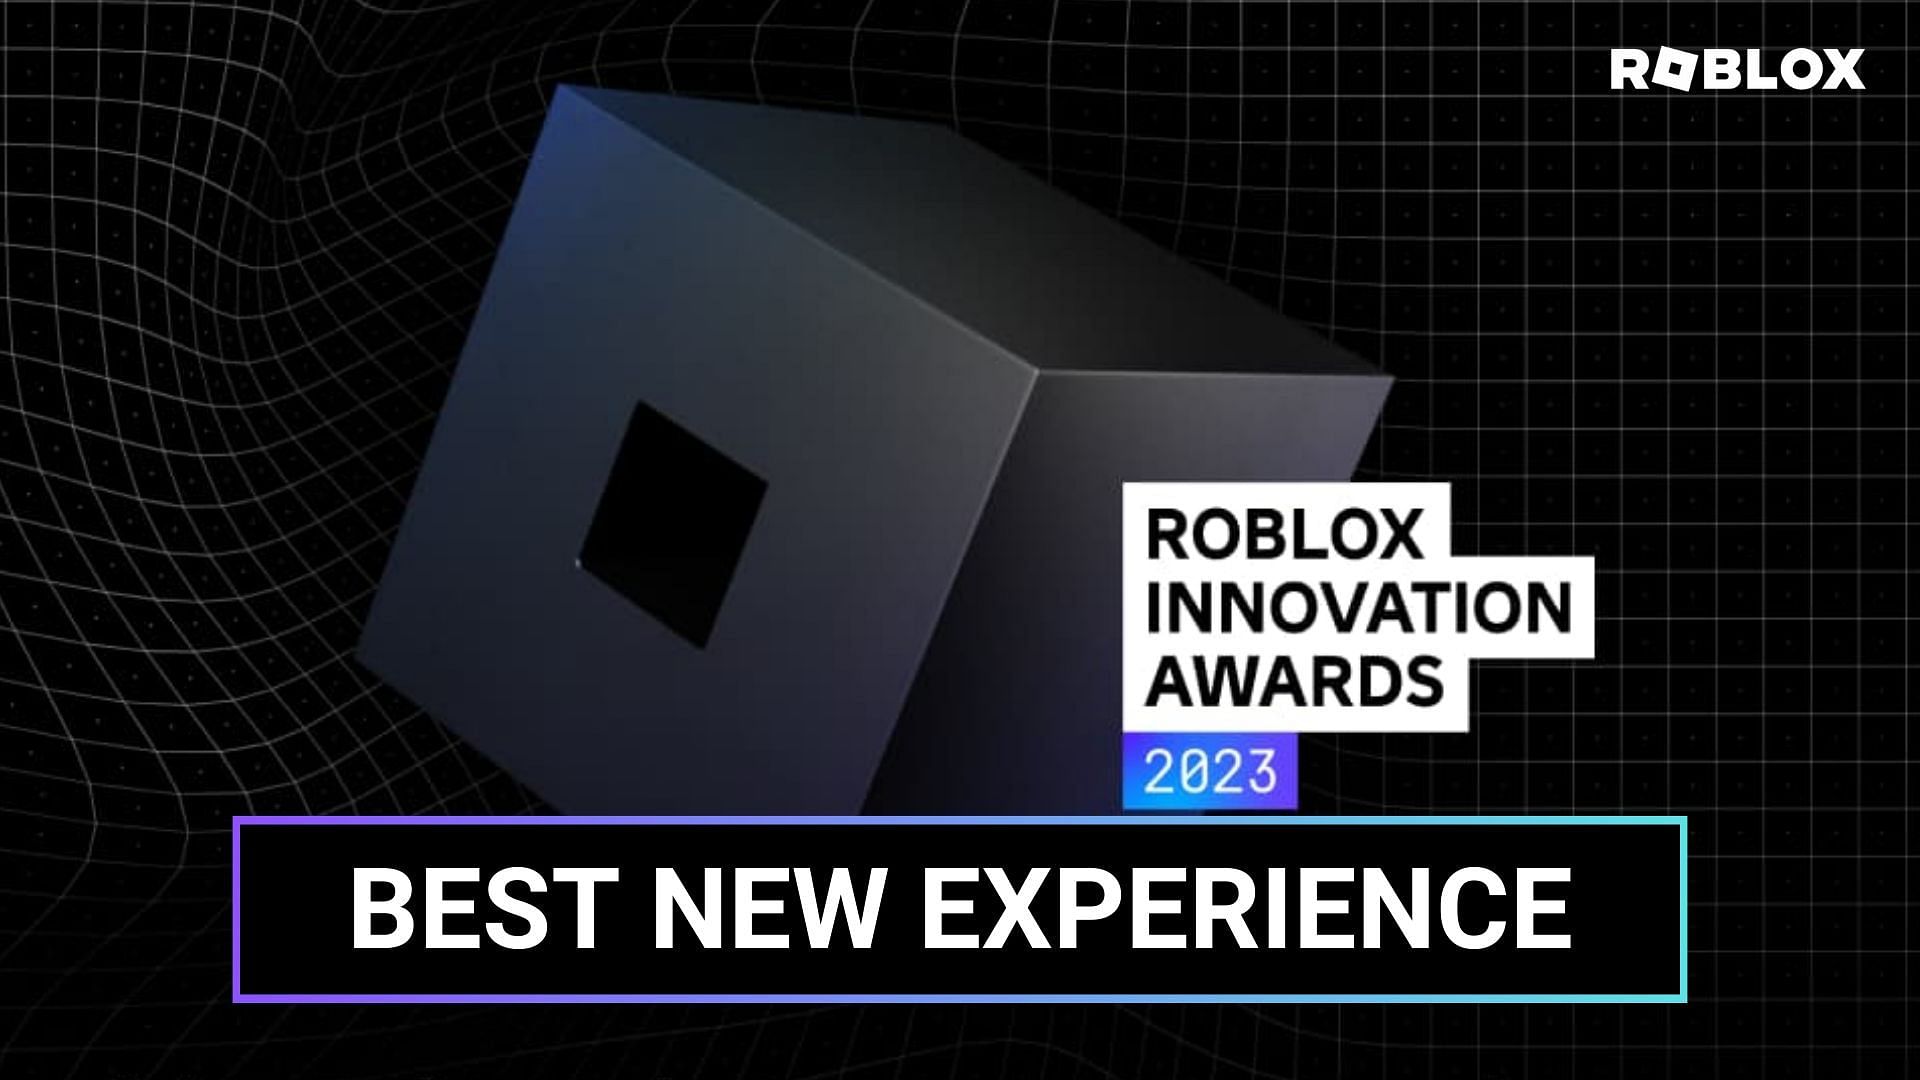 Free items Game! (Roblox Innovation Awards!!) - Roblox